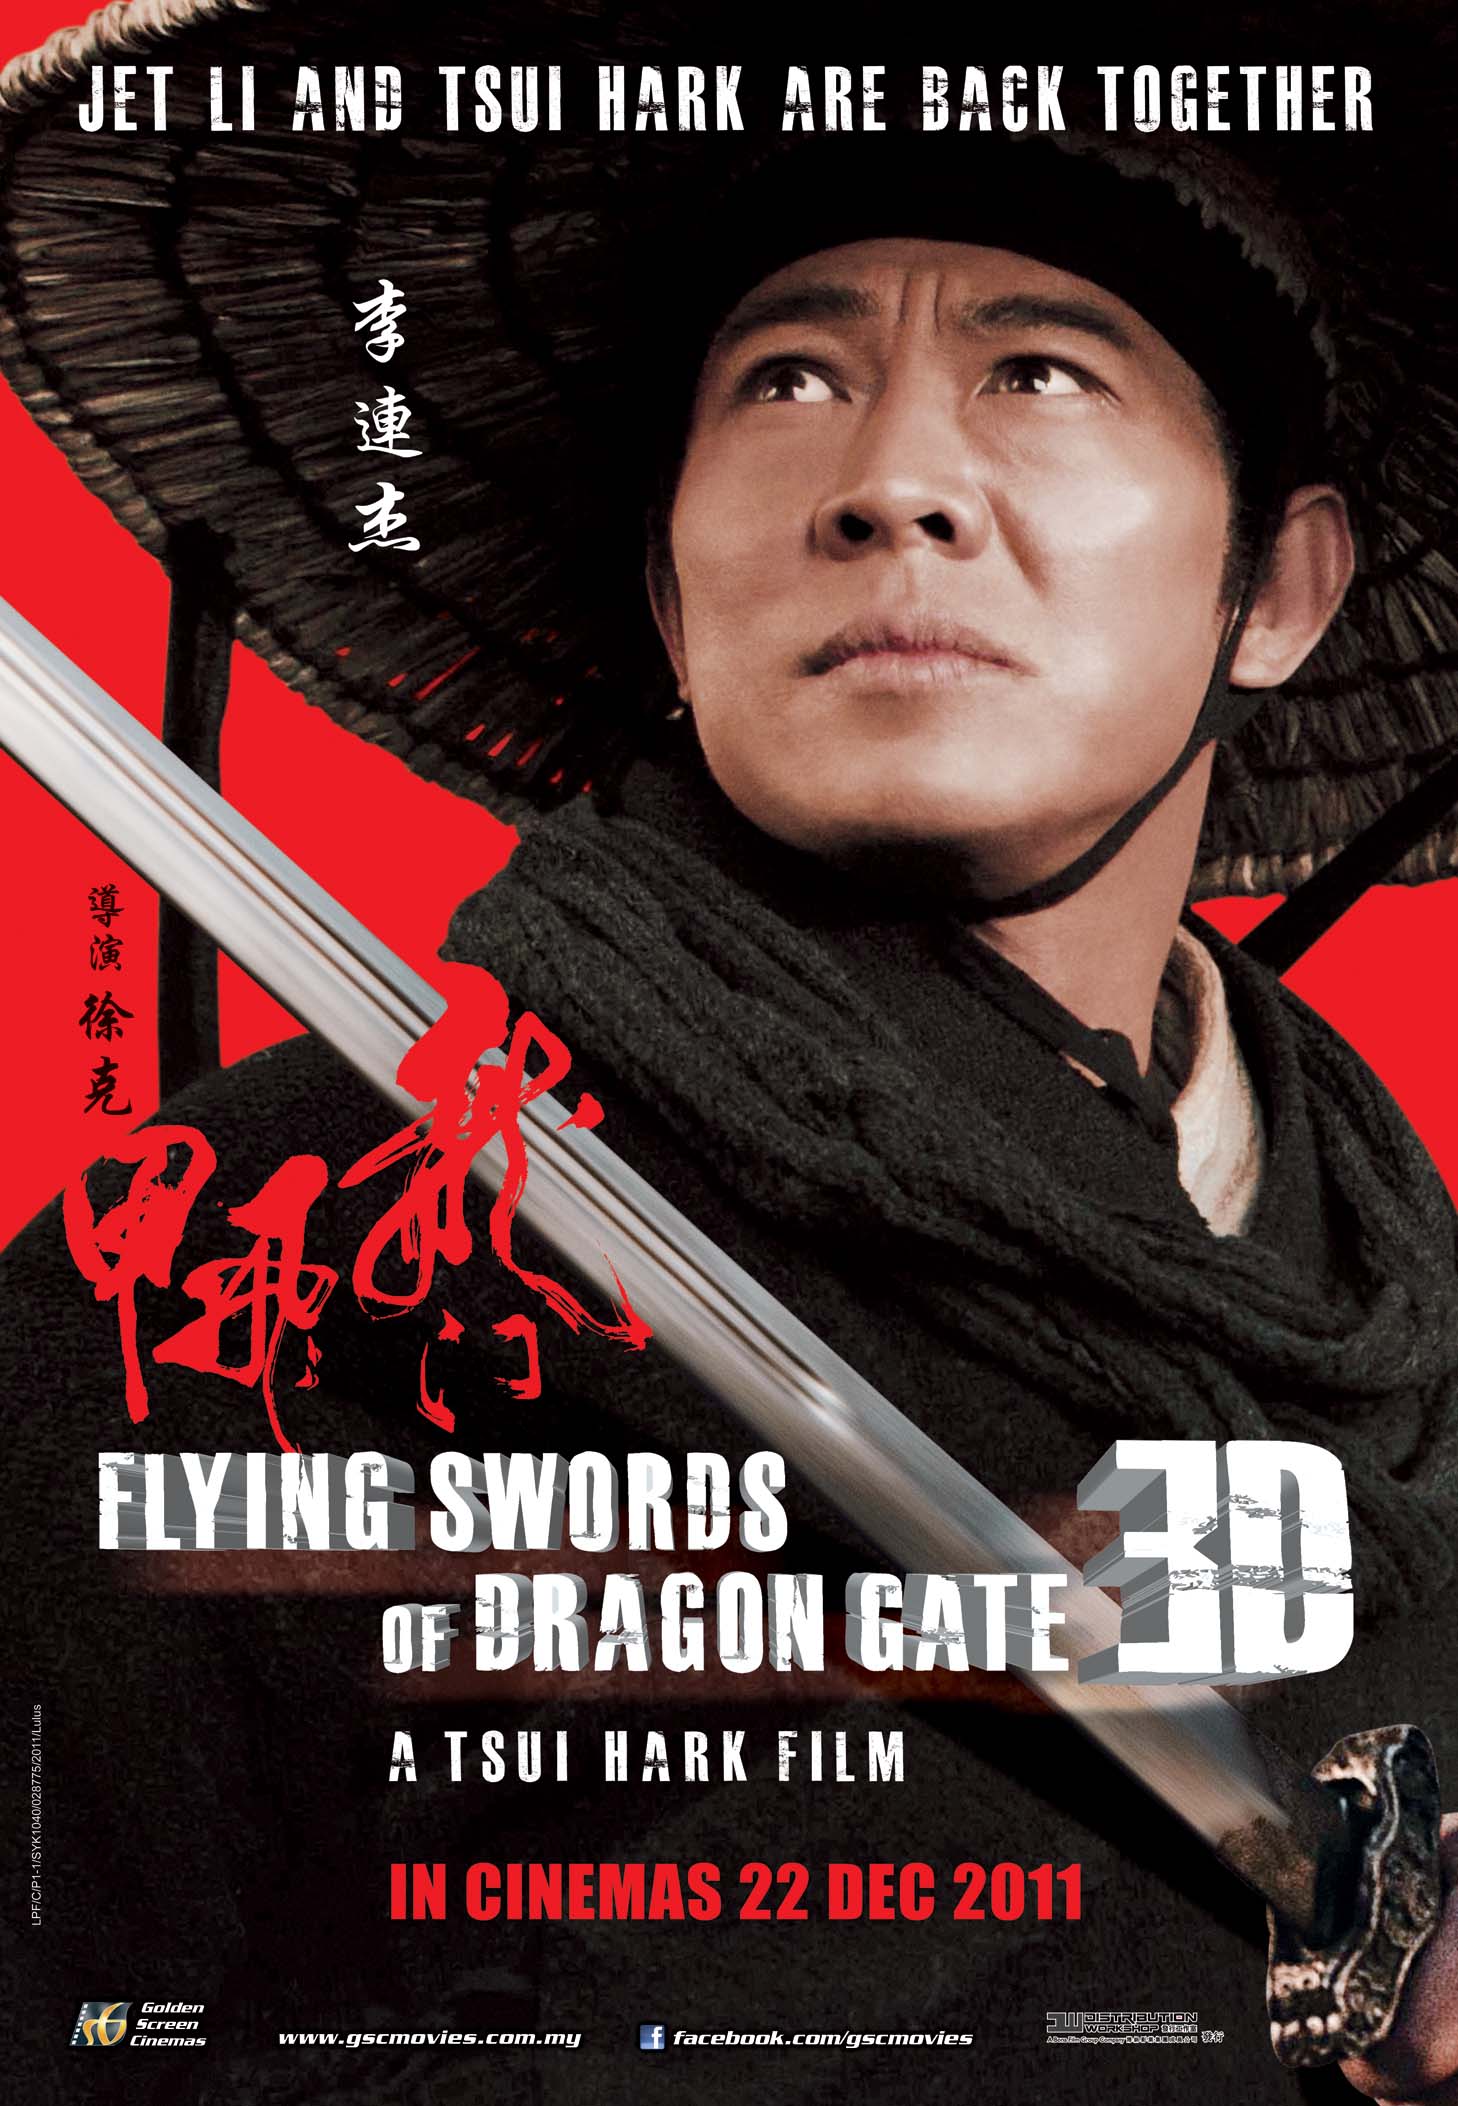 Nice Images Collection: Flying Swords Of Dragon Gate Desktop Wallpapers